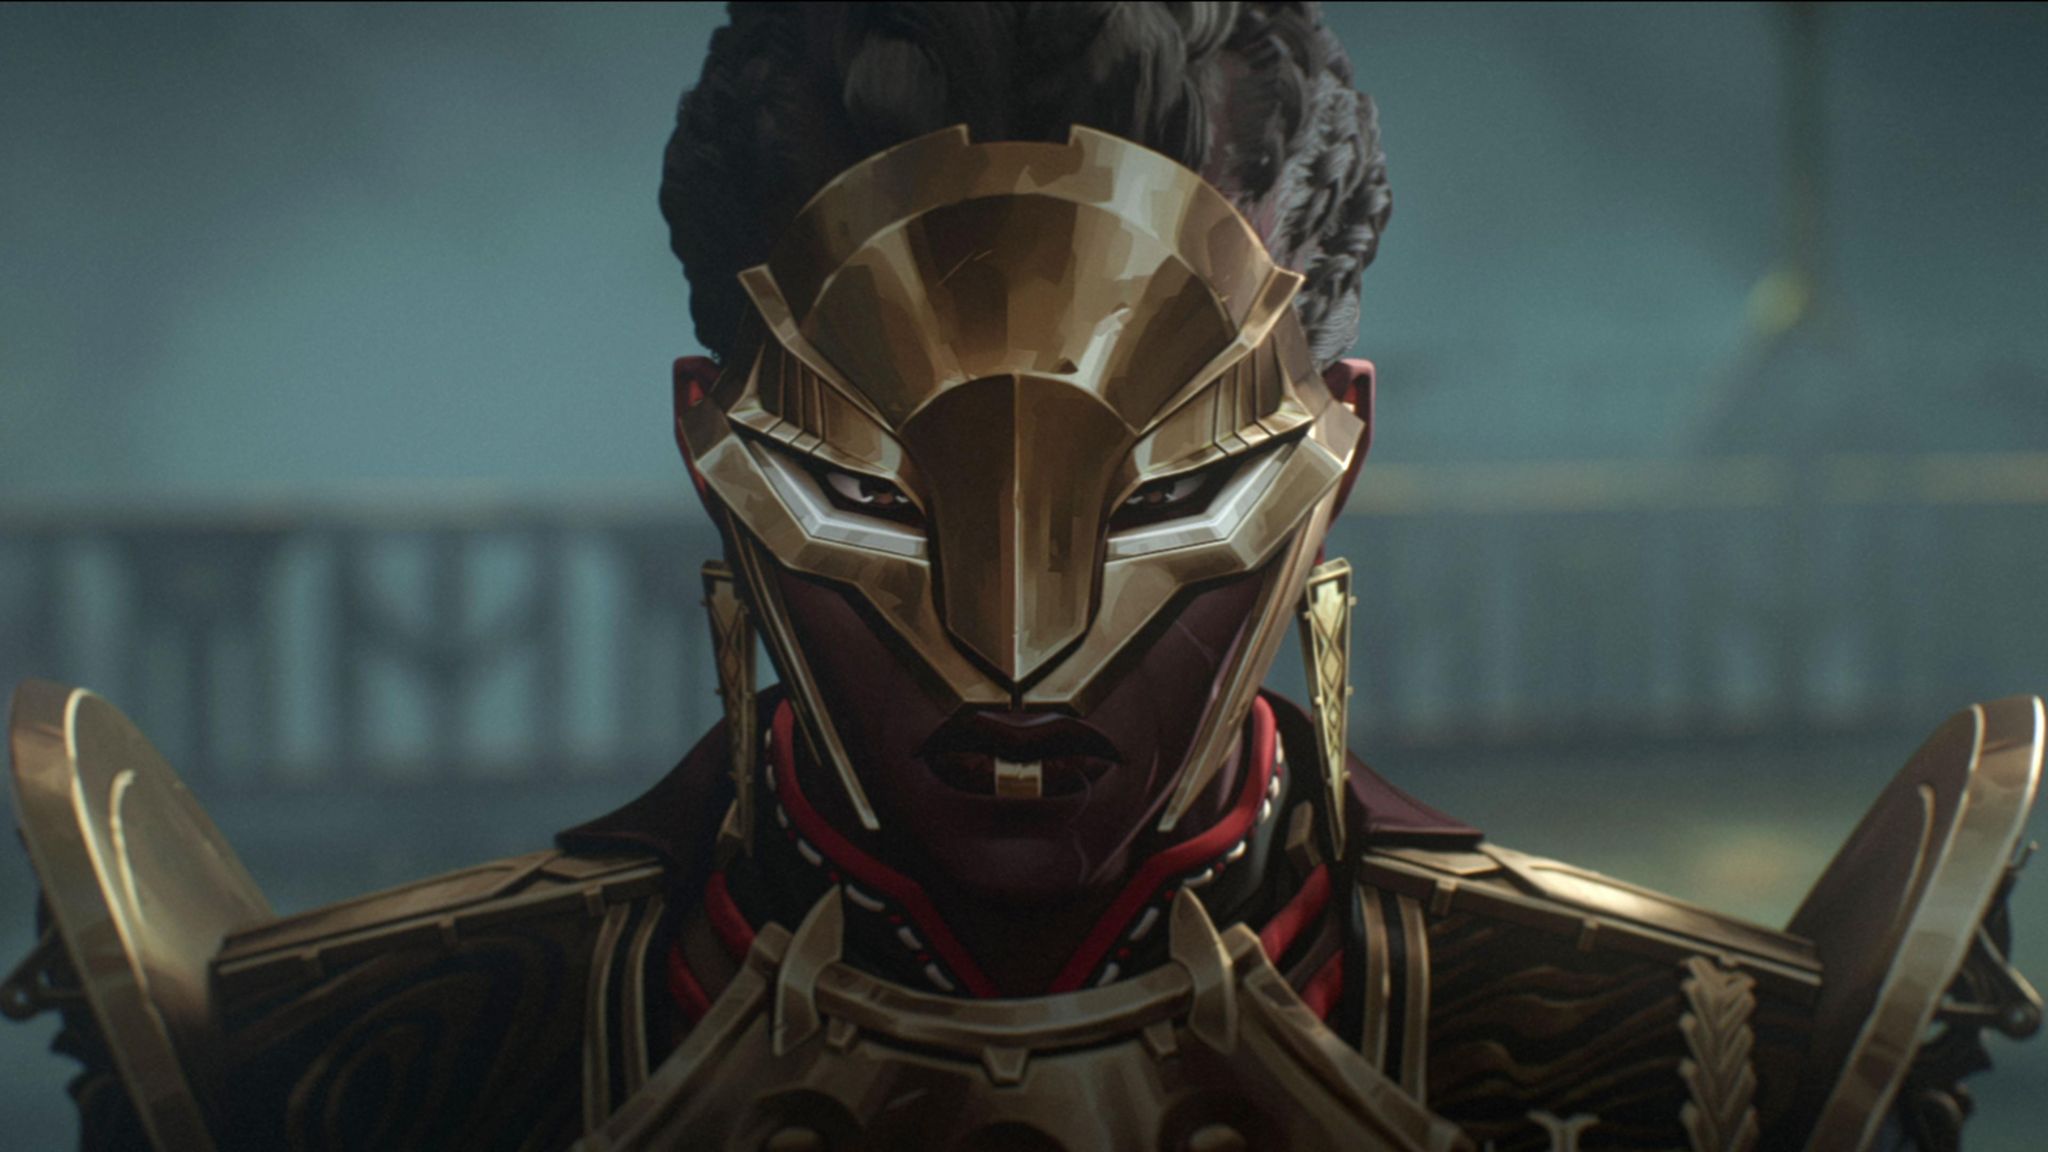 A character in gold armour and matching mask stares menacingly at the viewer in this screengrab from animated series Arcane.